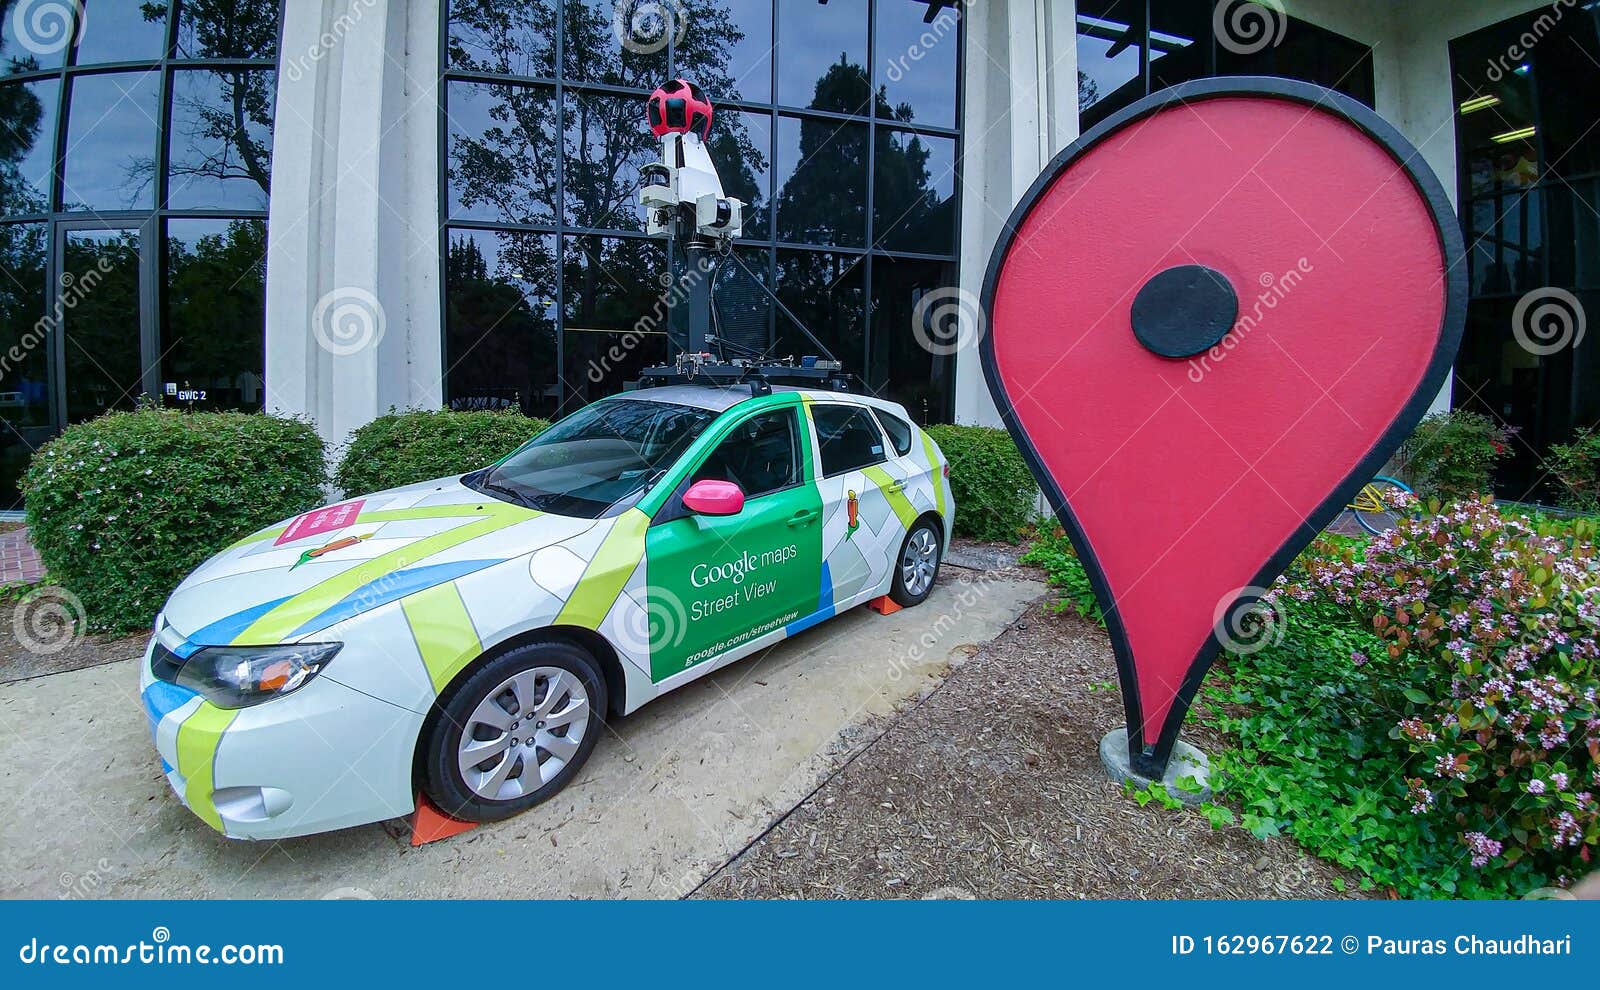 Creed Forebyggelse Dyrke motion Mountain View, CA, USA - April 18 2017: Google Maps Street View Car with  Cameras Mounted on Top Editorial Photography - Image of meadow, daytime:  162967622